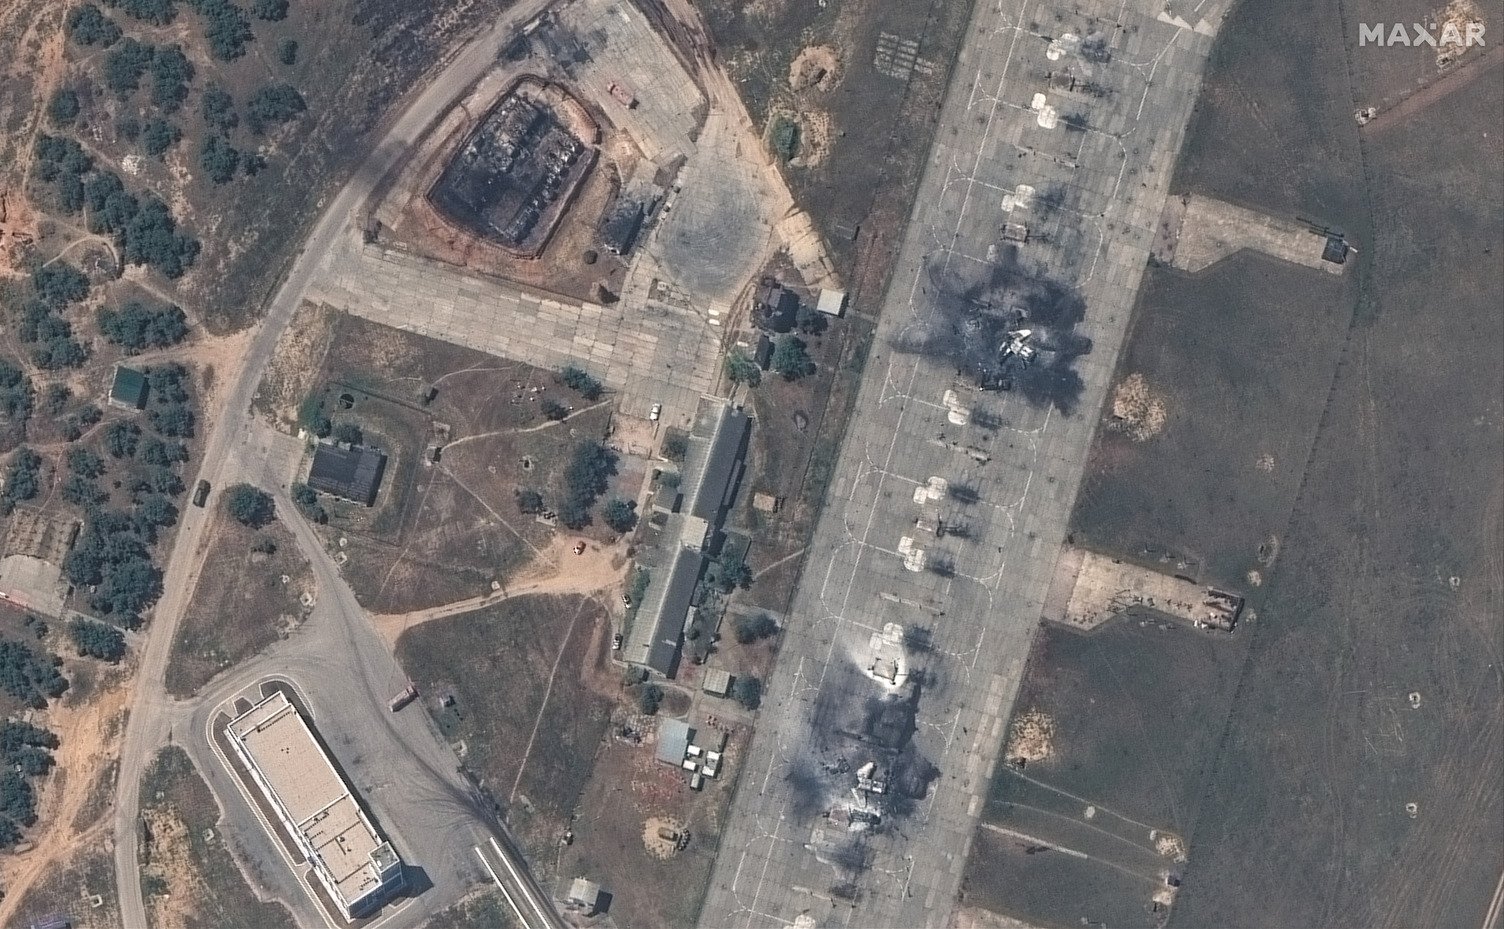 Minus four fighters and a fuel depot: Satellites photograph destroyed Russian aircraft